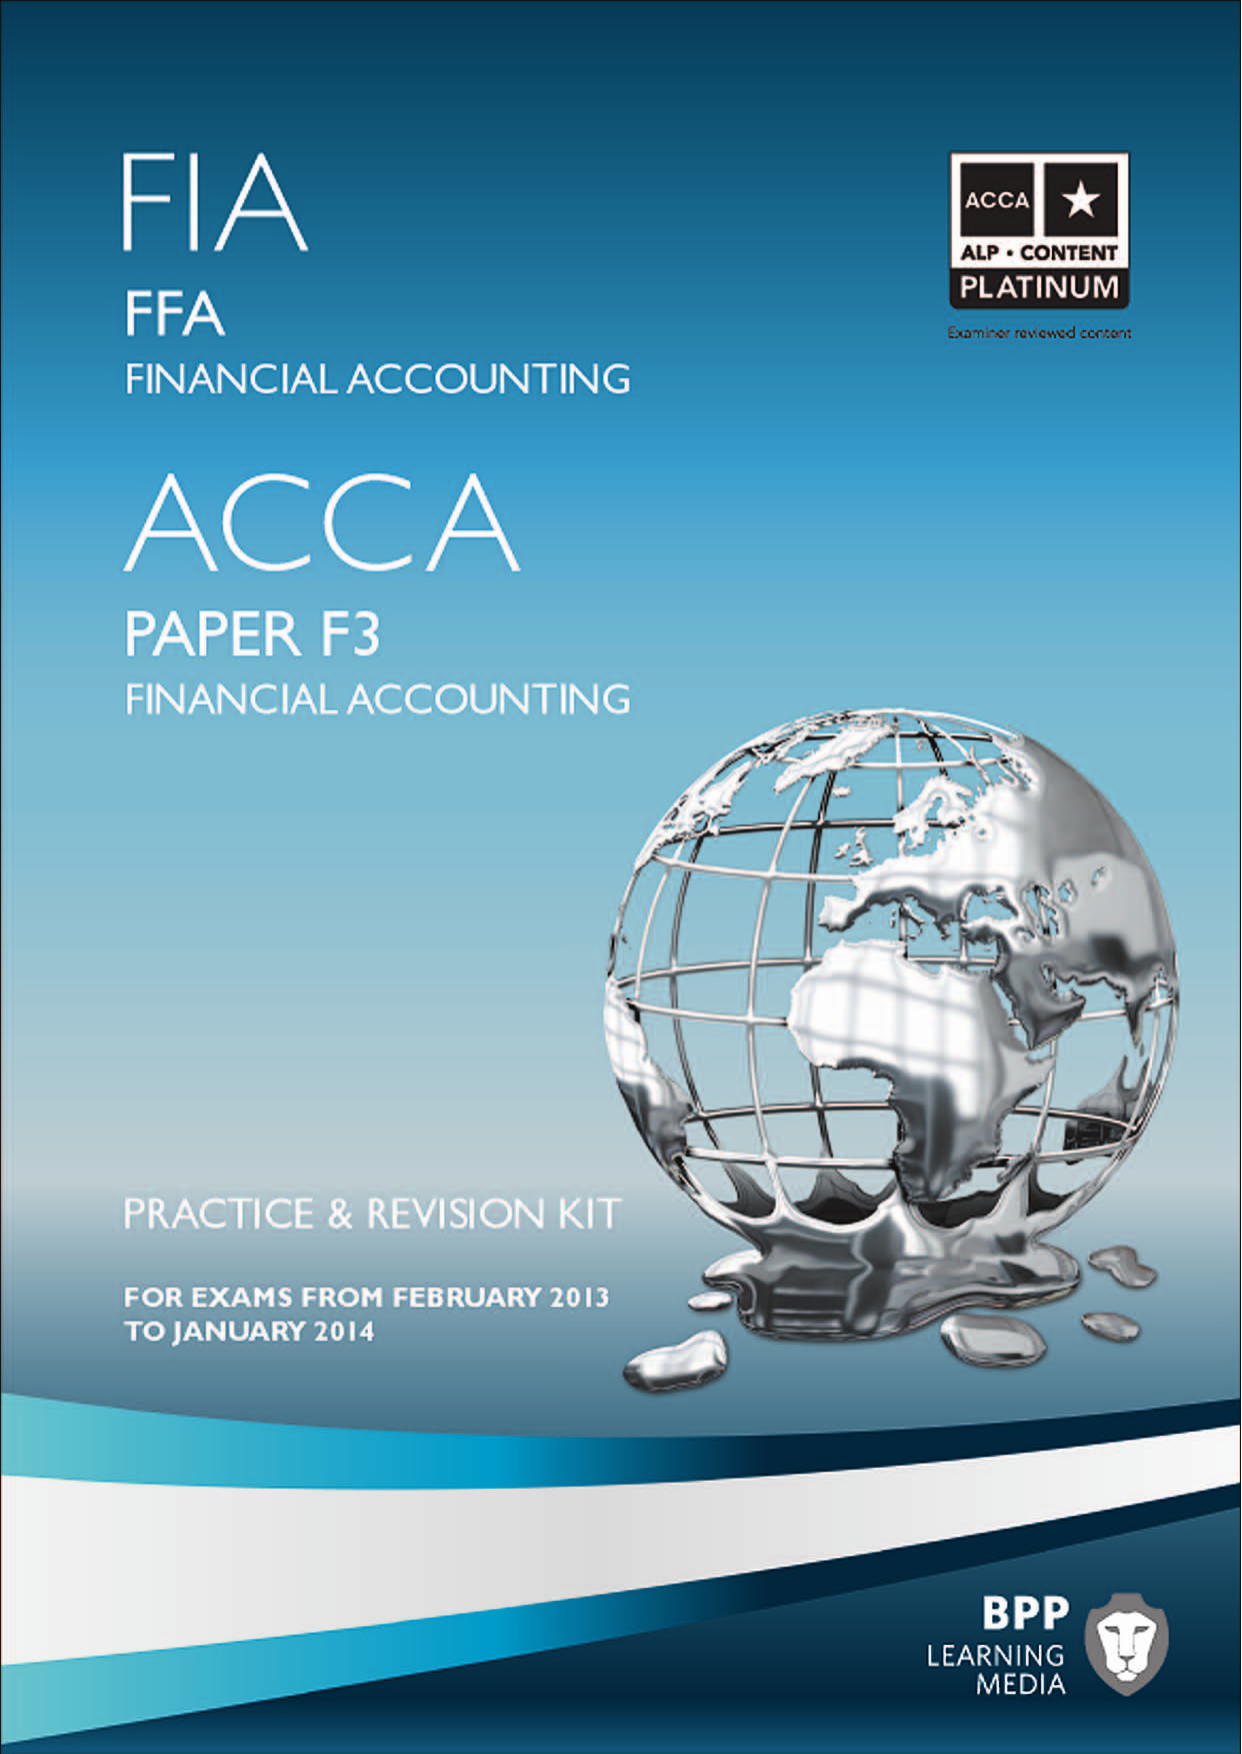 Interactive text. ACCA f3. ACCA Financial Accounting. Financial Accounting (ACCA f3). ACCA paper f3 Financial Accounting BPP Learning Media 2017.